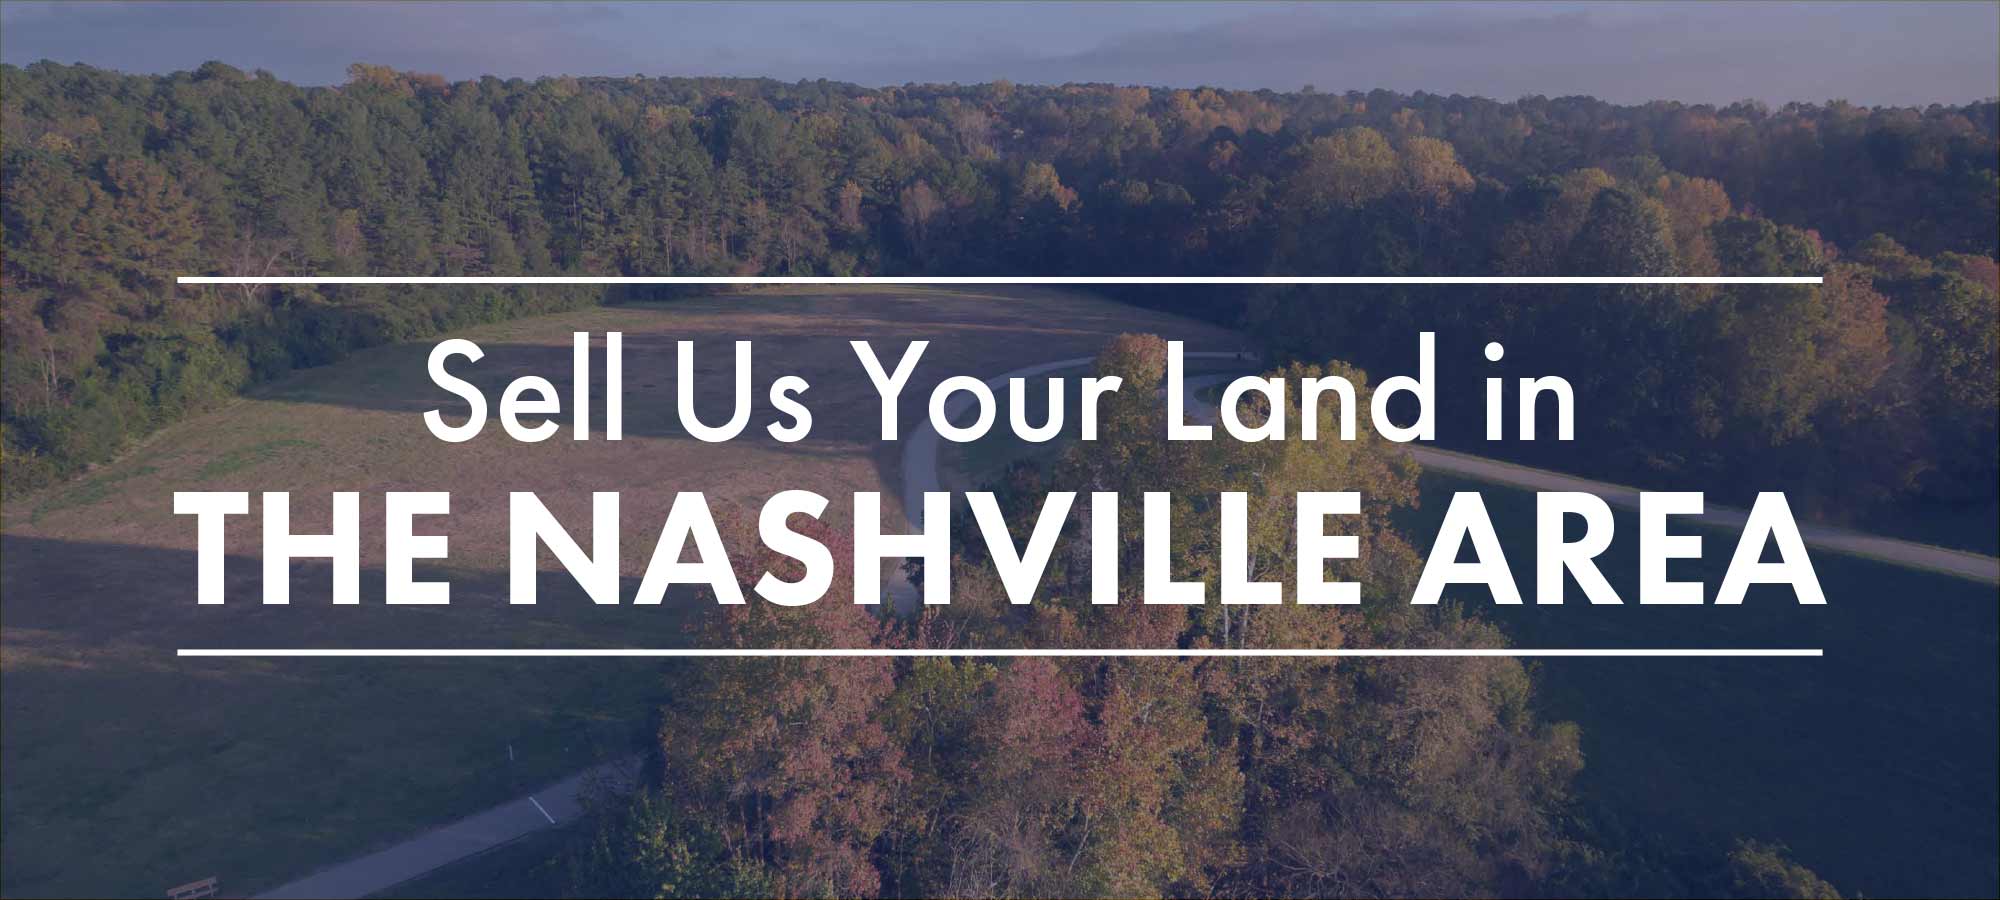 Sell Us Your Land in the Nashville Area